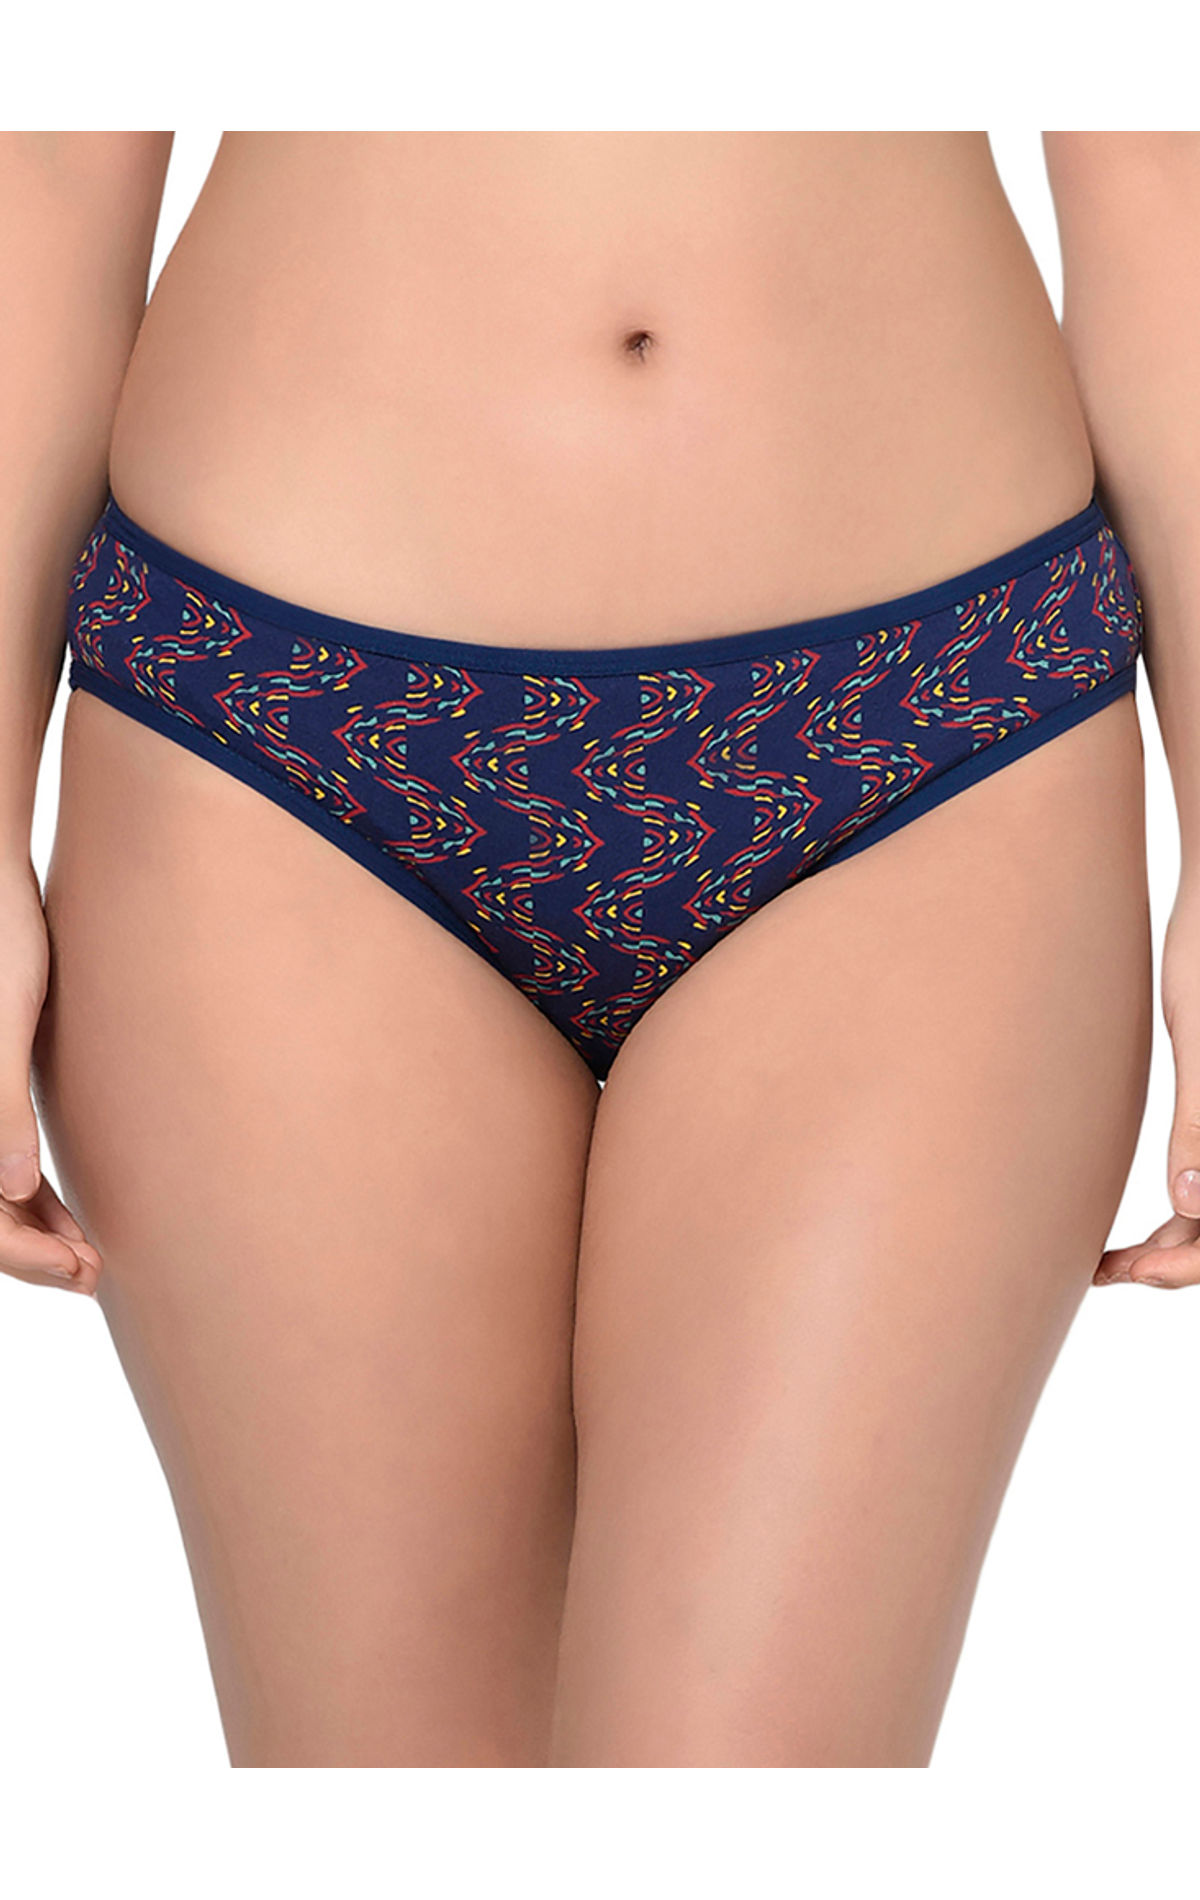 BODYCARE Printed Panty in Coimbatore - Dealers, Manufacturers & Suppliers -  Justdial